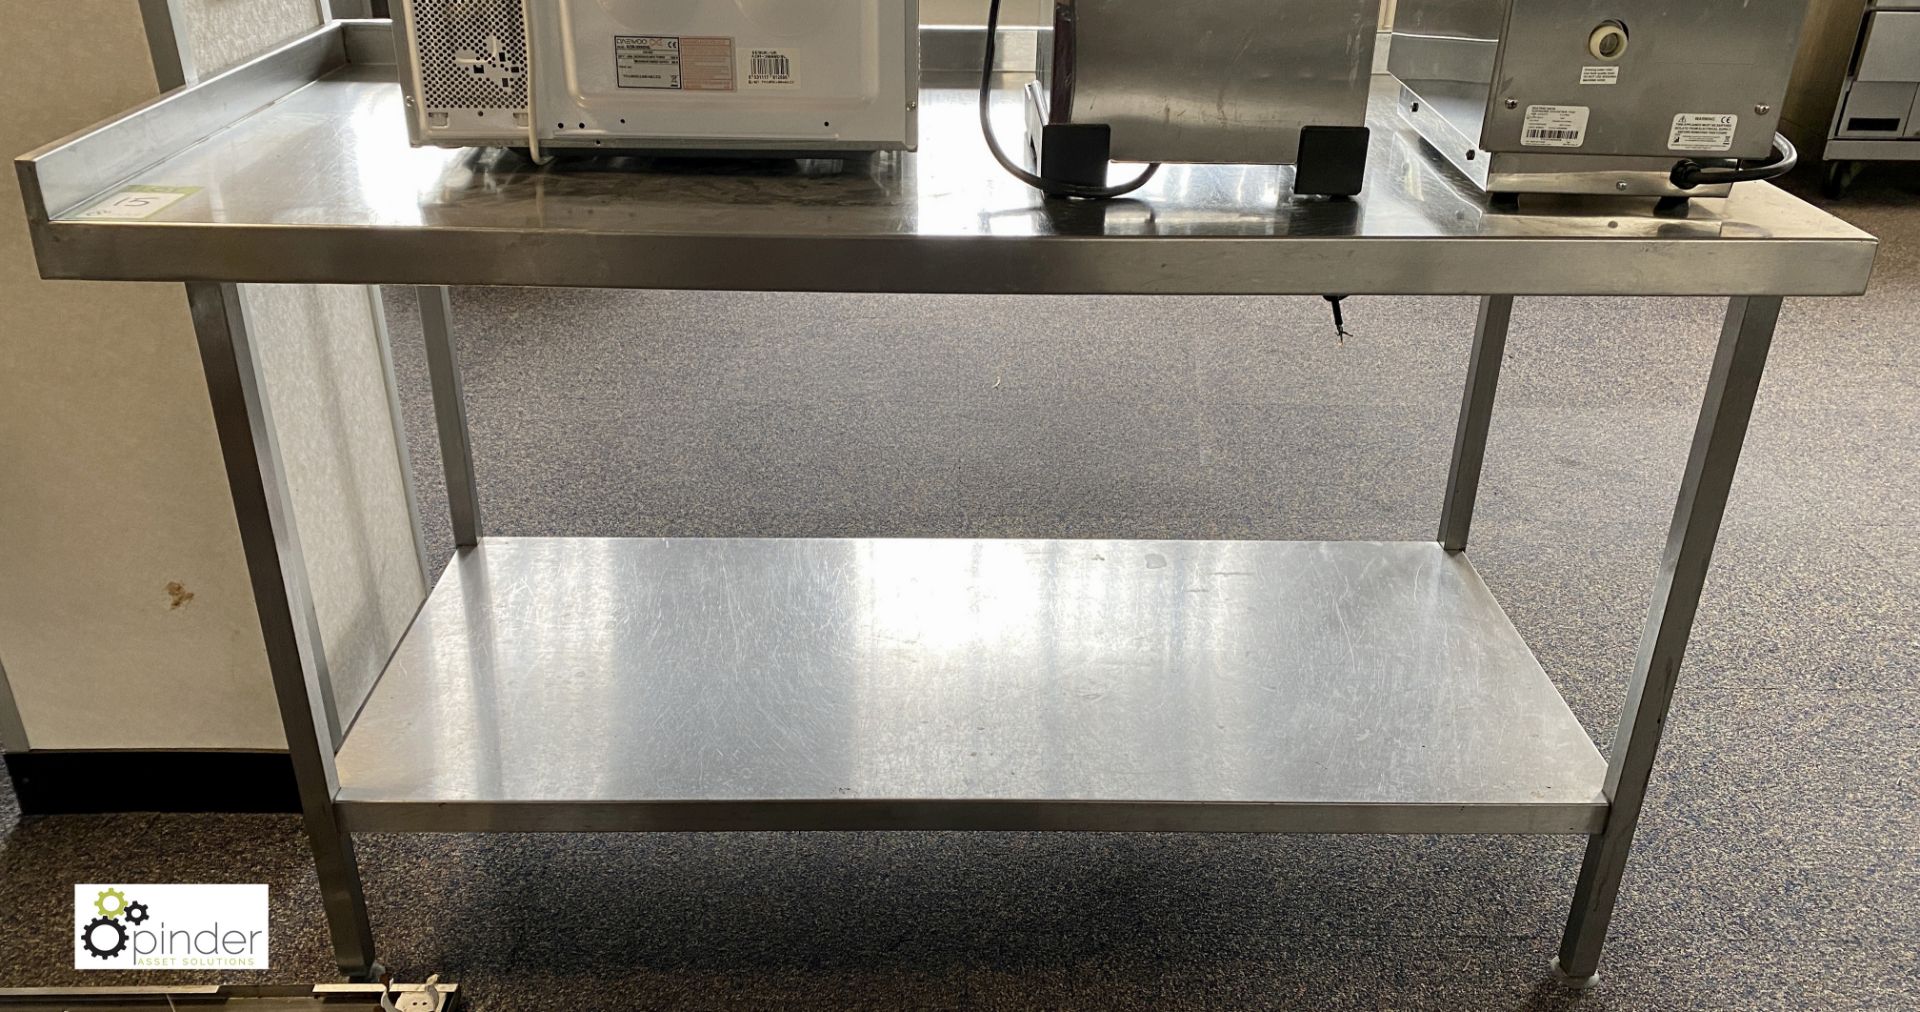 Stainless steel Preparation Table, 1500mm x 700mm x 840mm, with left and rear lips and under shelf